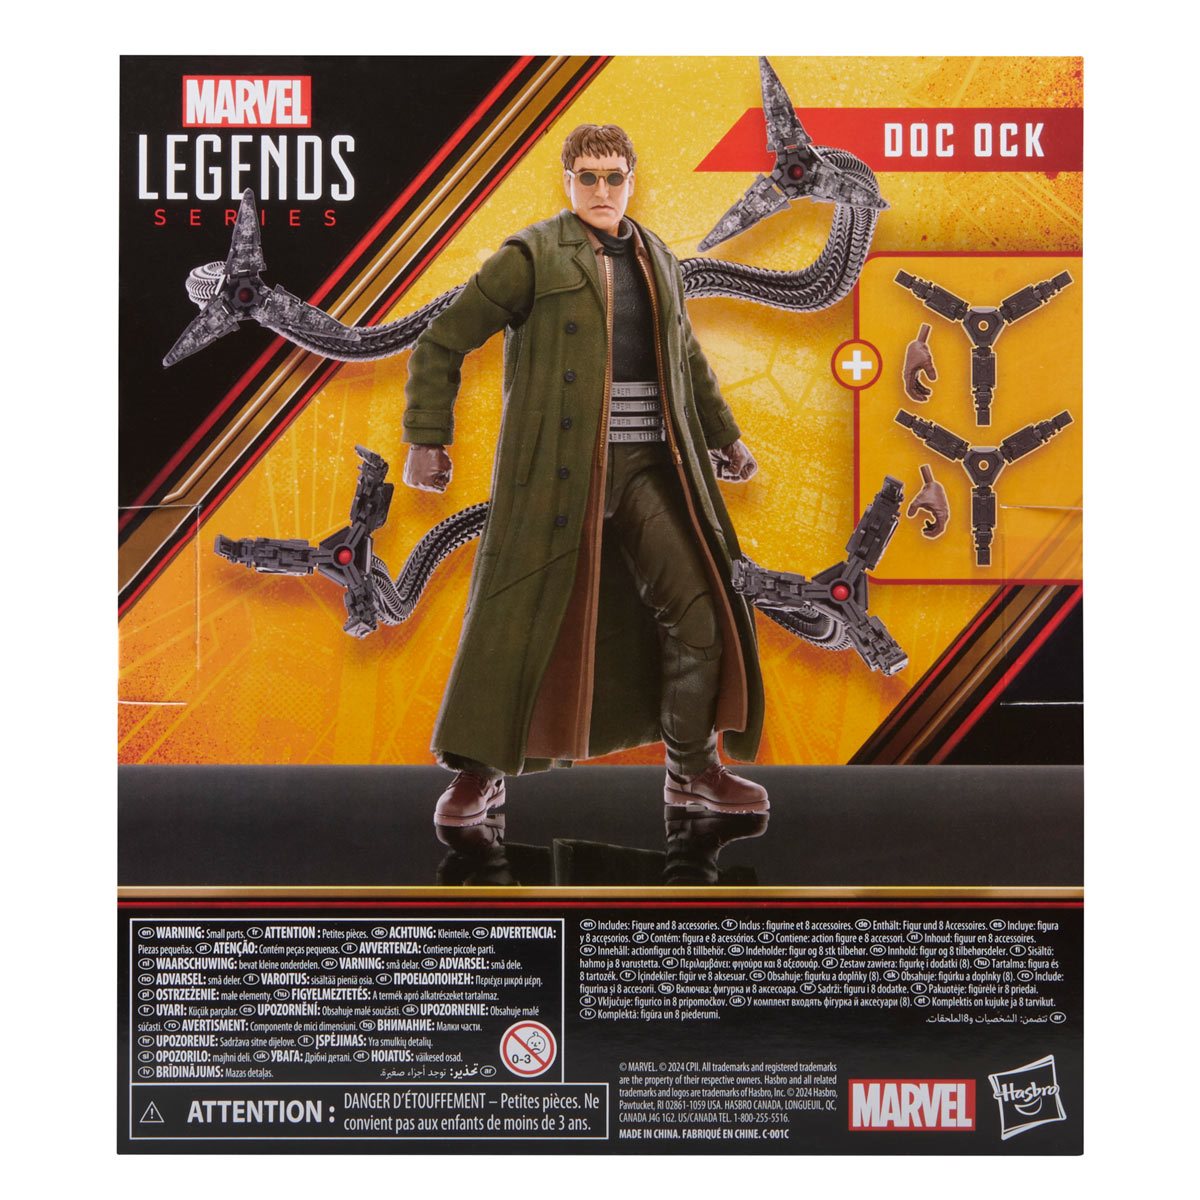 Marvel Legends - Green Goblin and Doc Ock Revealed!! Spider Man No Way Home!!  